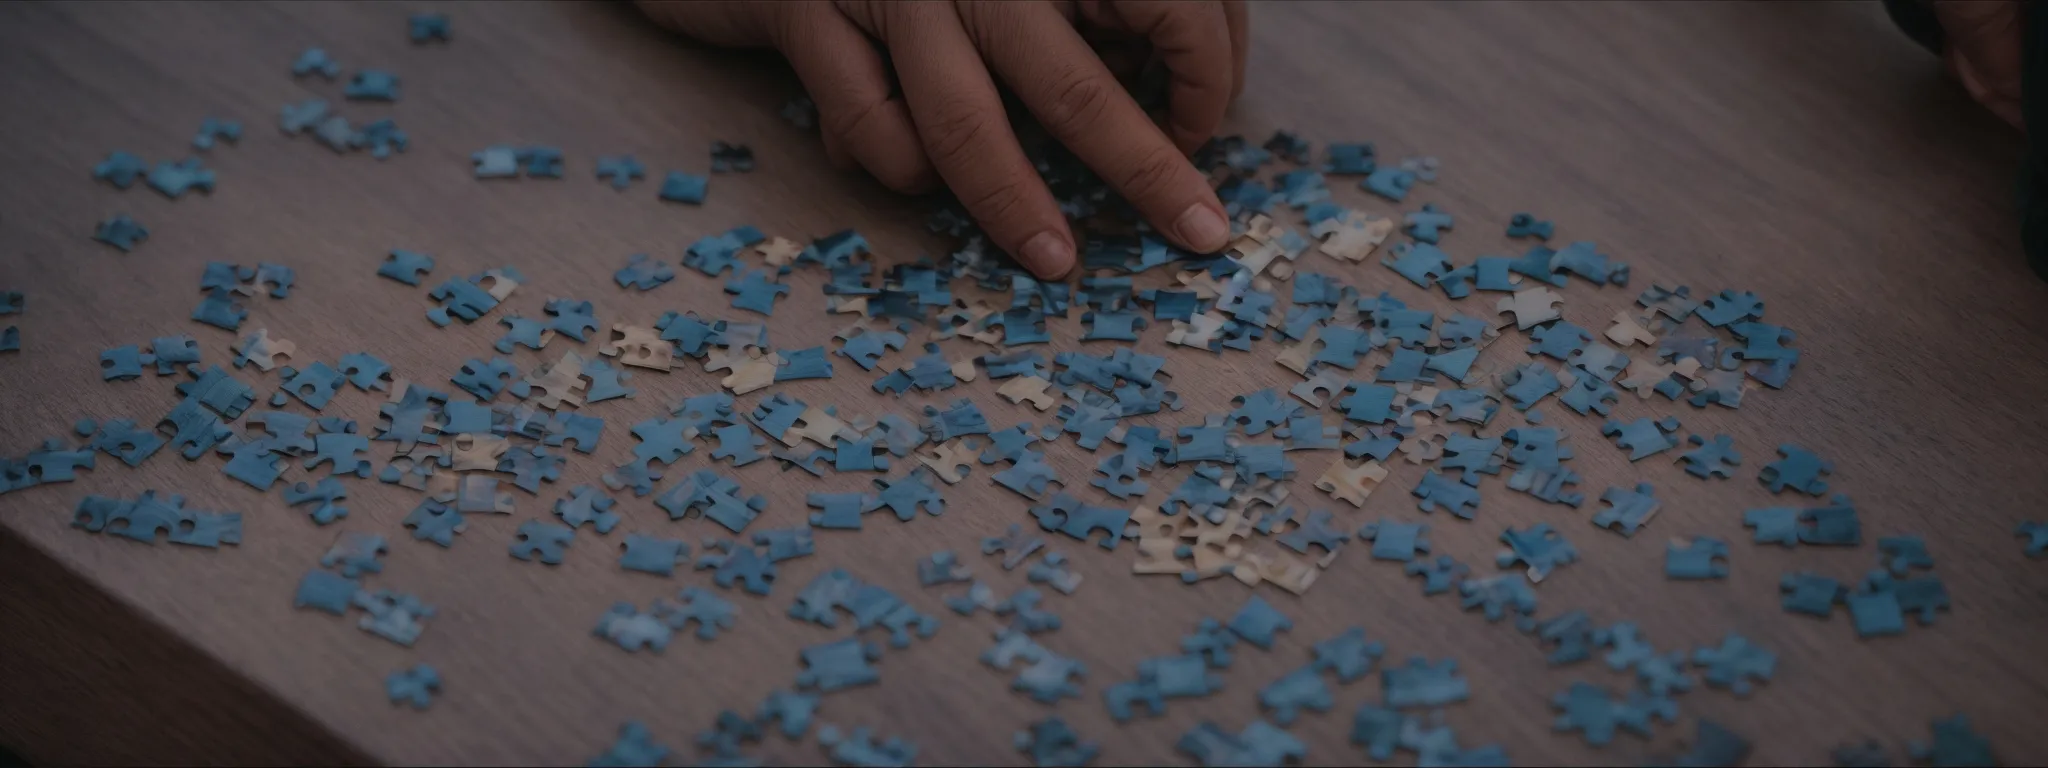 a person thoughtfully arranging puzzle pieces on a table to form a clear, complete picture.